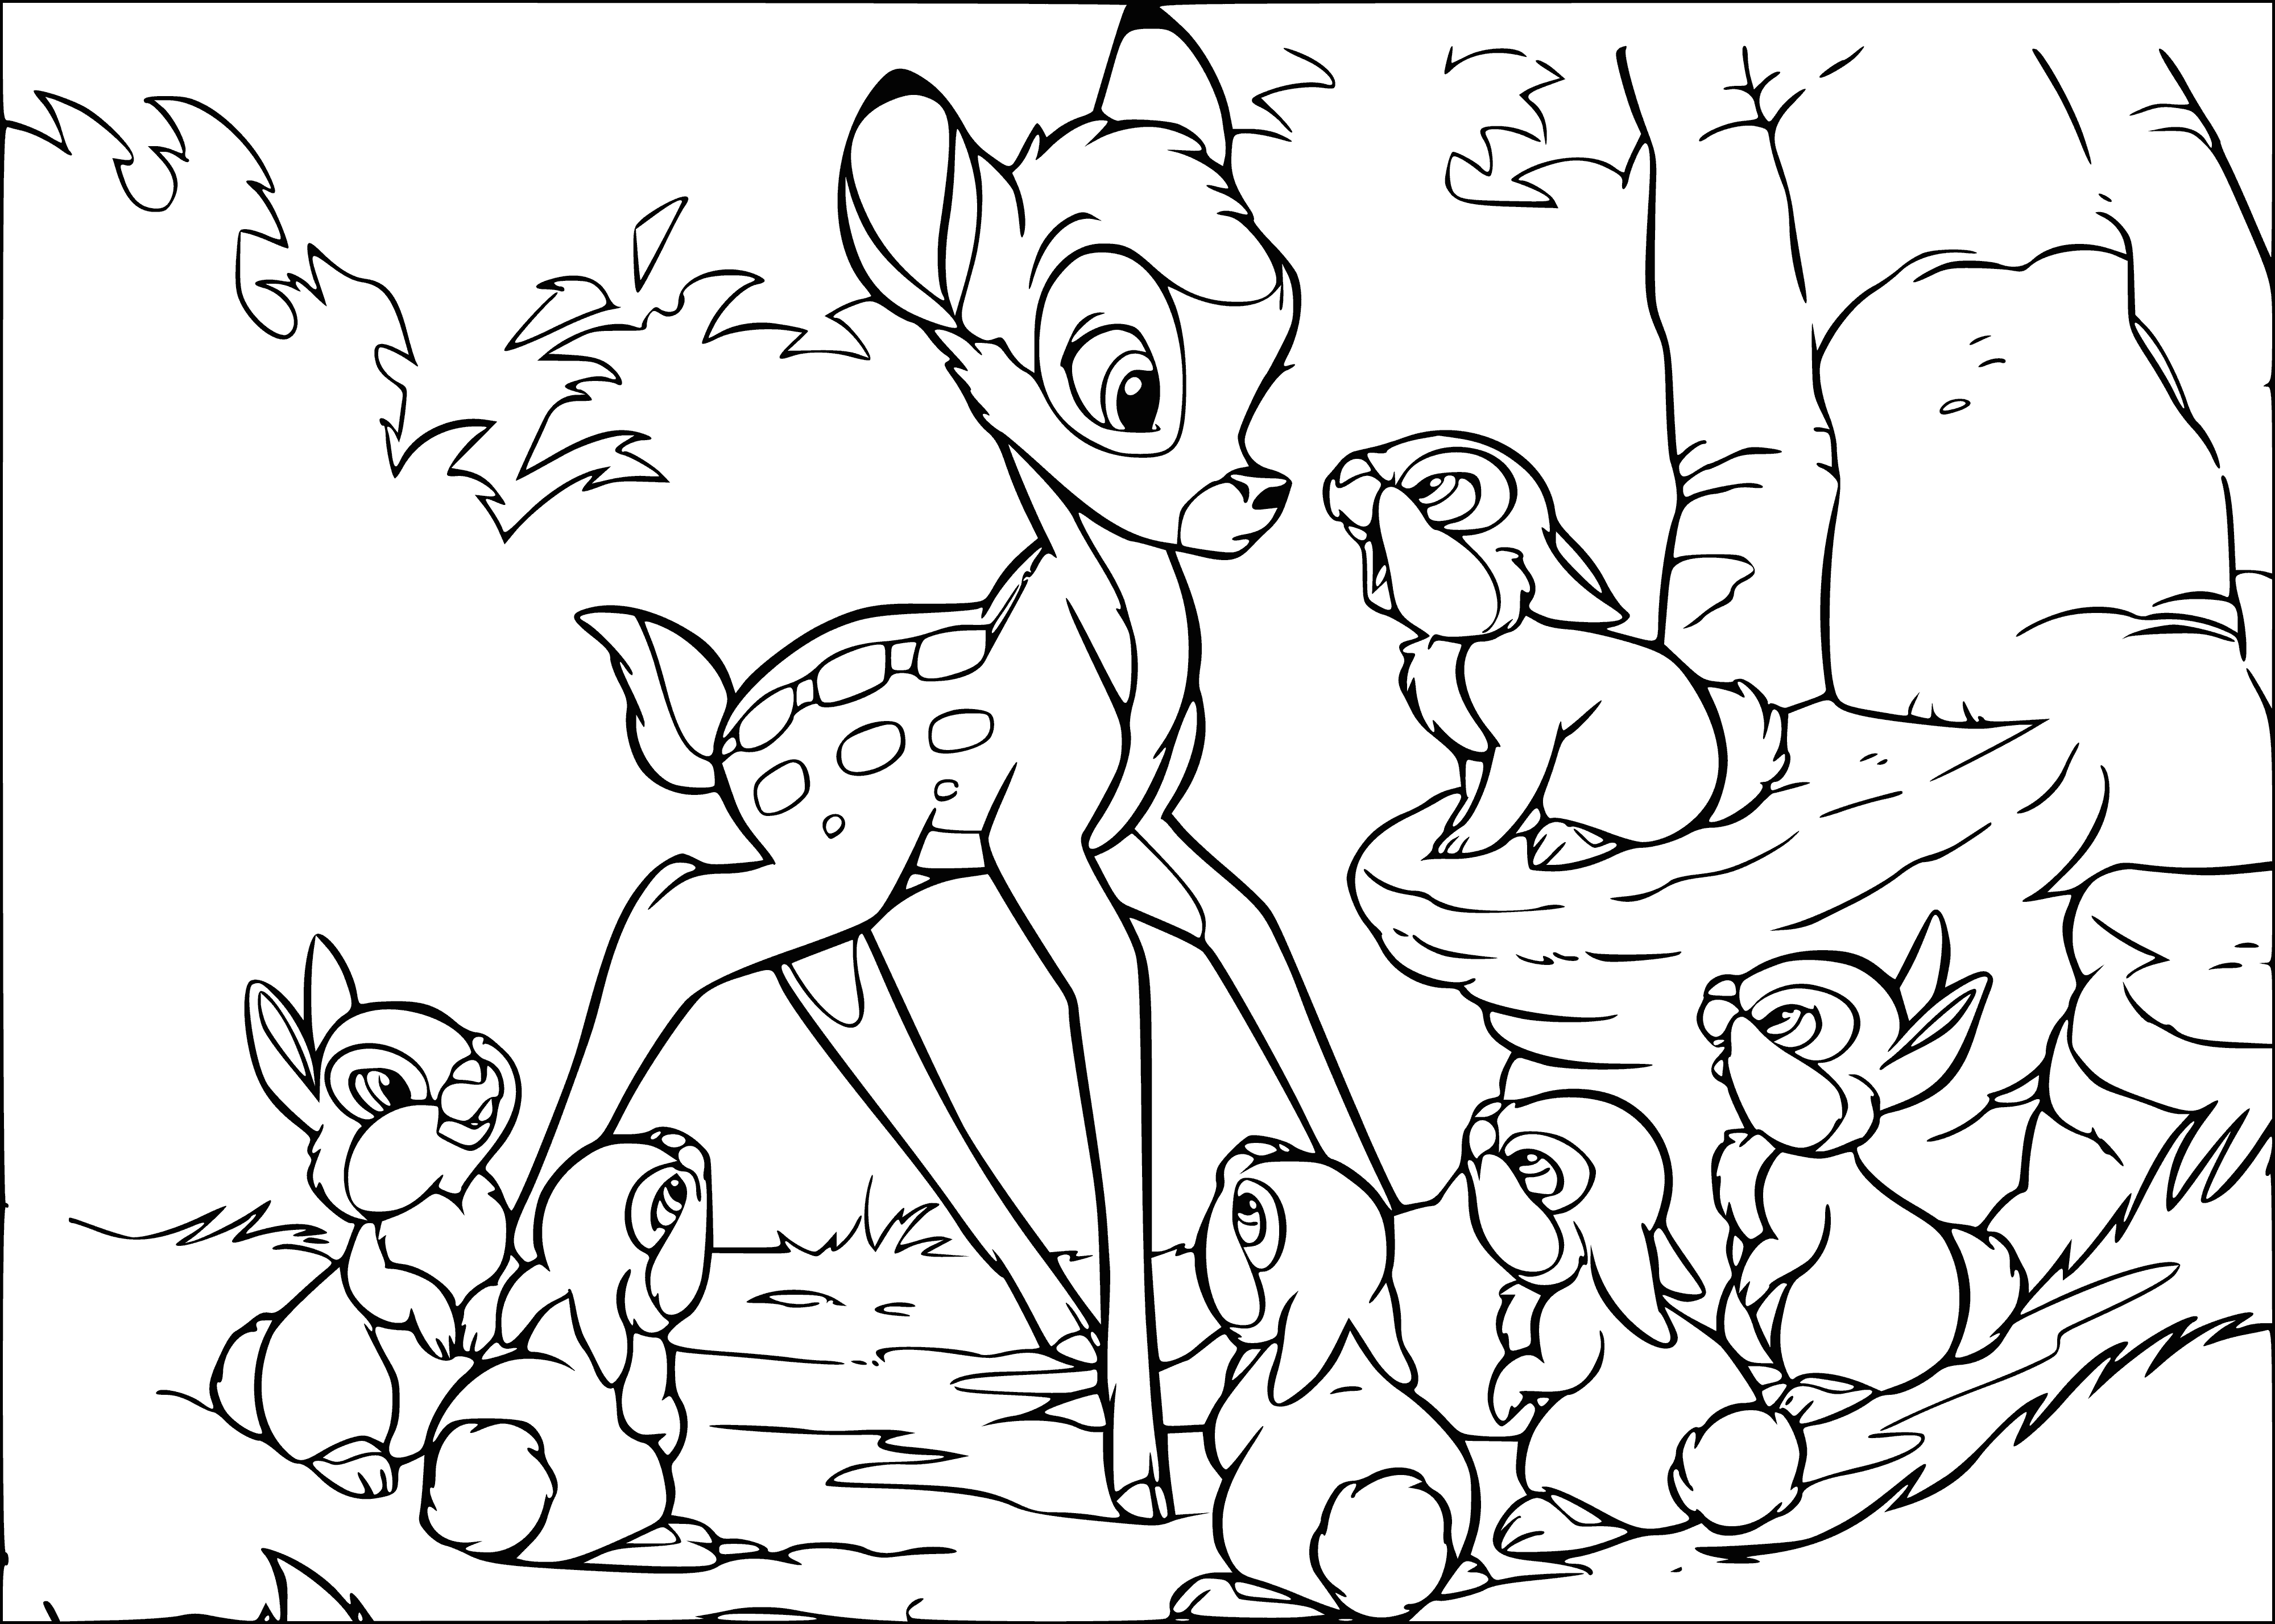 Hares and Bambi coloring page